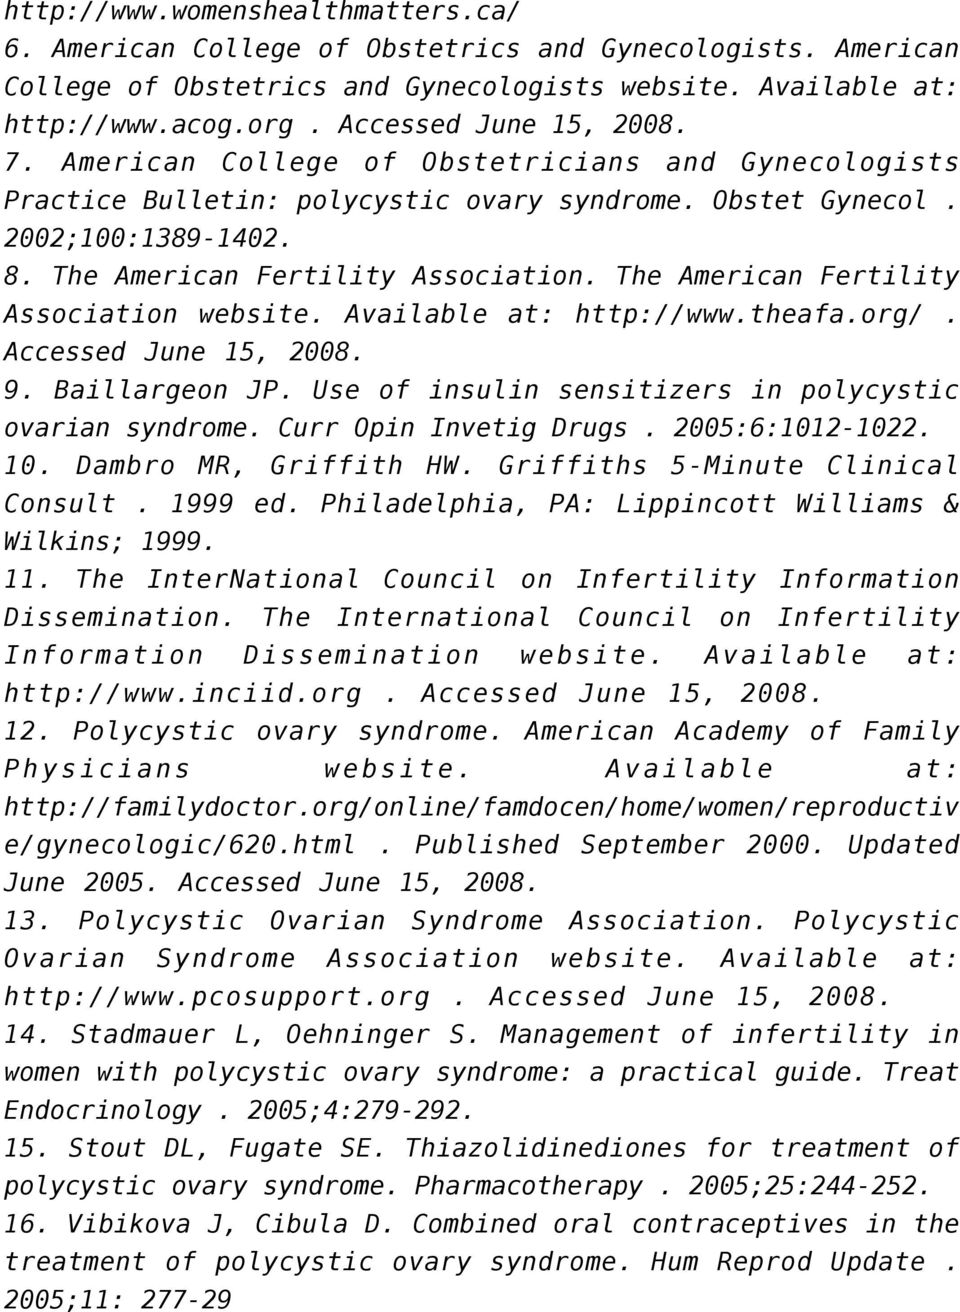 The American Fertility Association website. Available at: http://www.theafa.org/. Accessed June 15, 2008. 9. Baillargeon JP. Use of insulin sensitizers in polycystic ovarian syndrome.